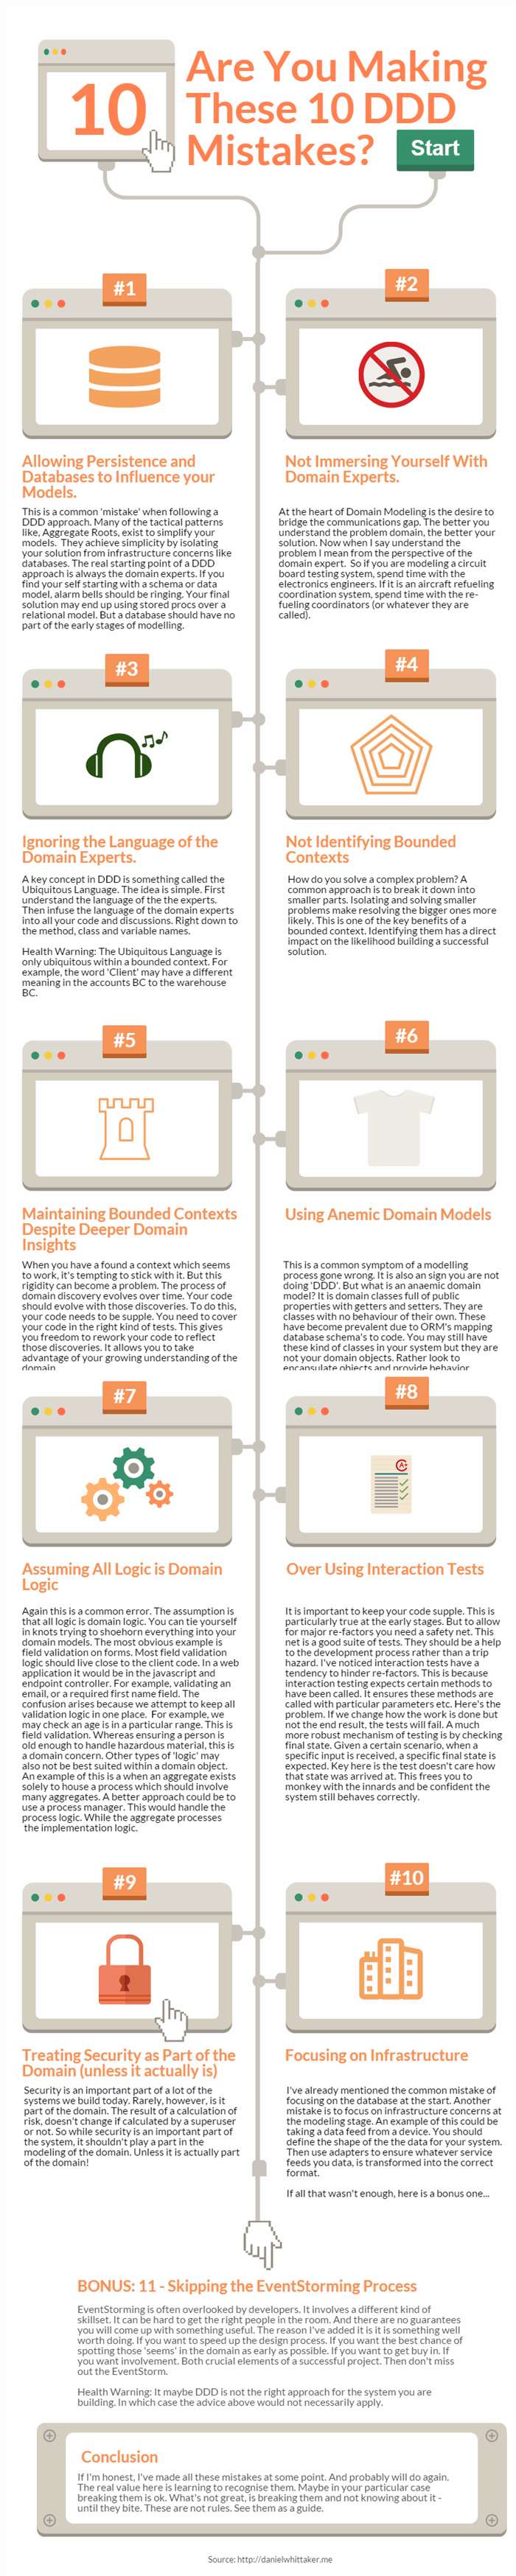 Are You Making These 10 DDD Mistakes? - An Infographic from Learn CQRS and Event Sourcing